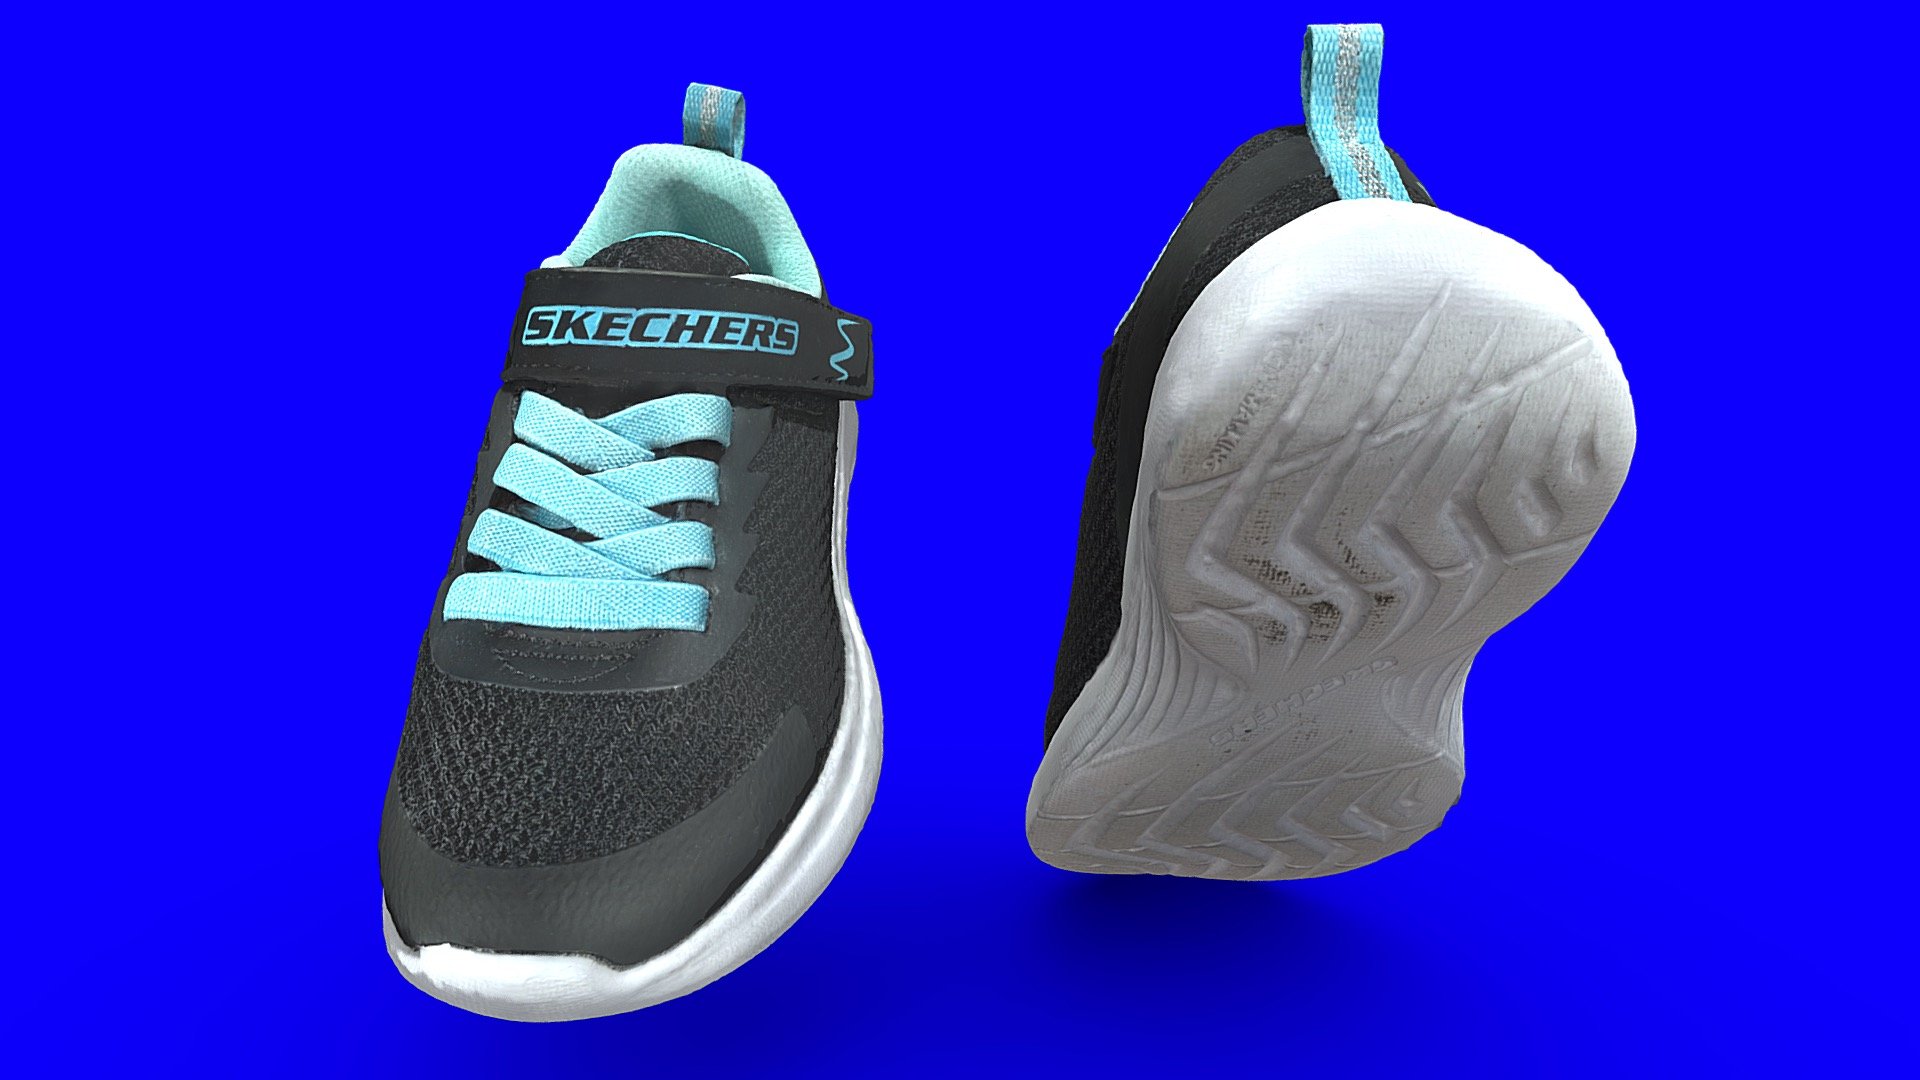 These Sketchers kids shoes was scanned with Polycam and processed in Blender 3d model